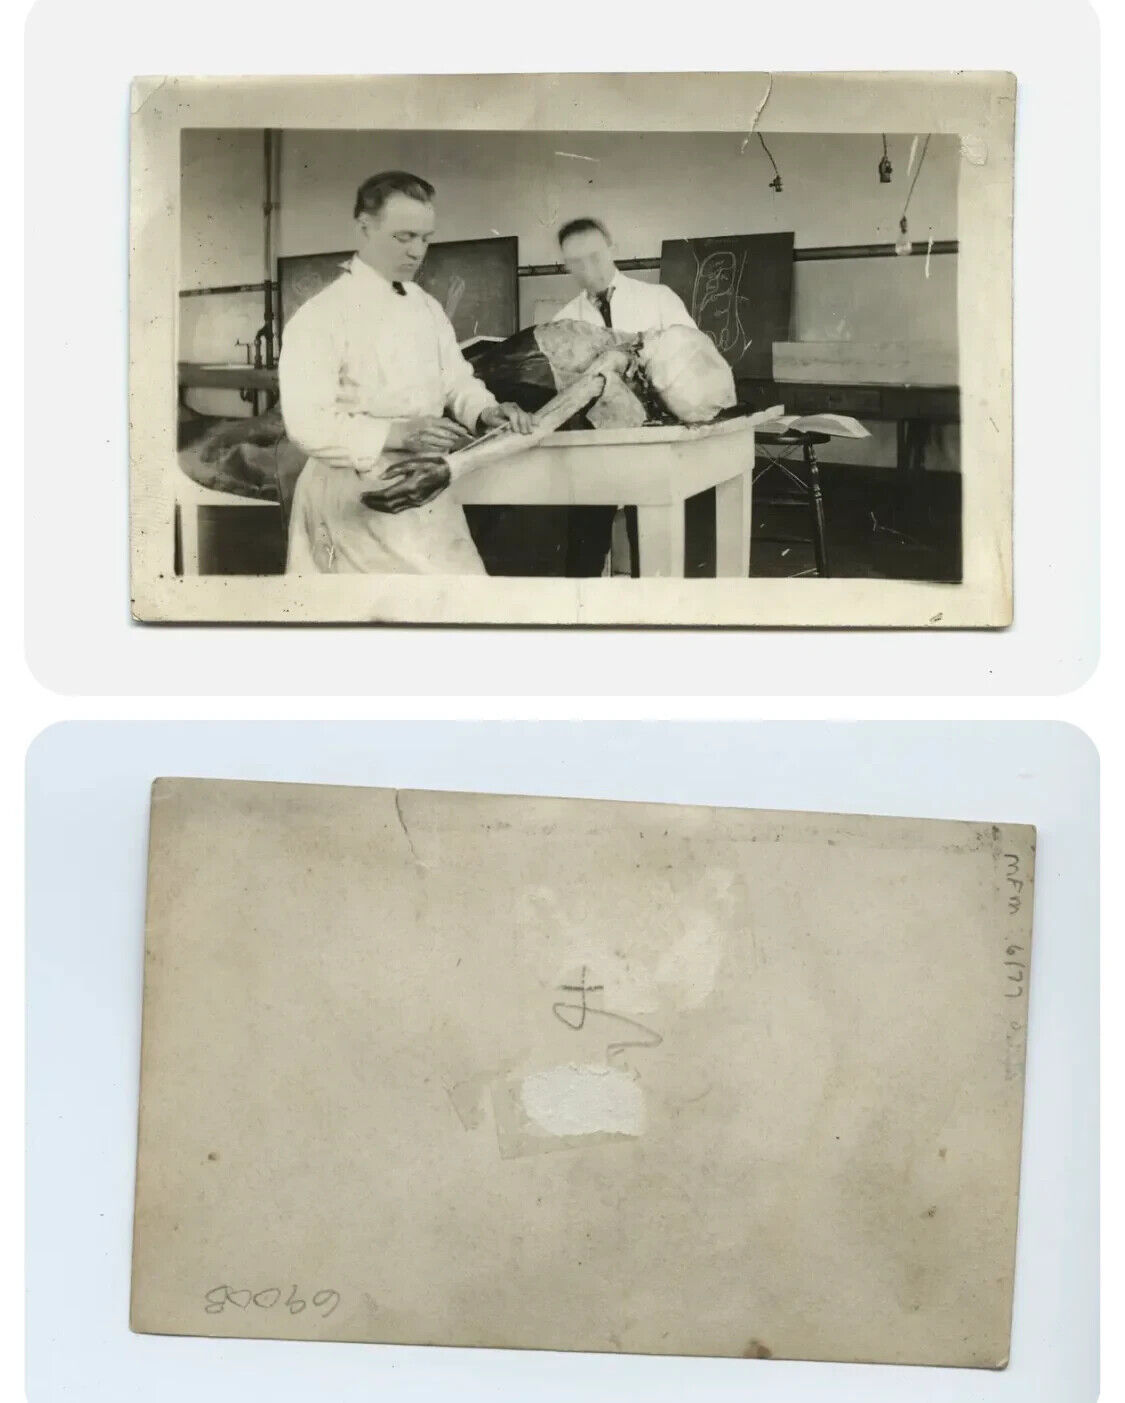 Medical Students & Dissection of Cadaver Antique / Vintage Photo